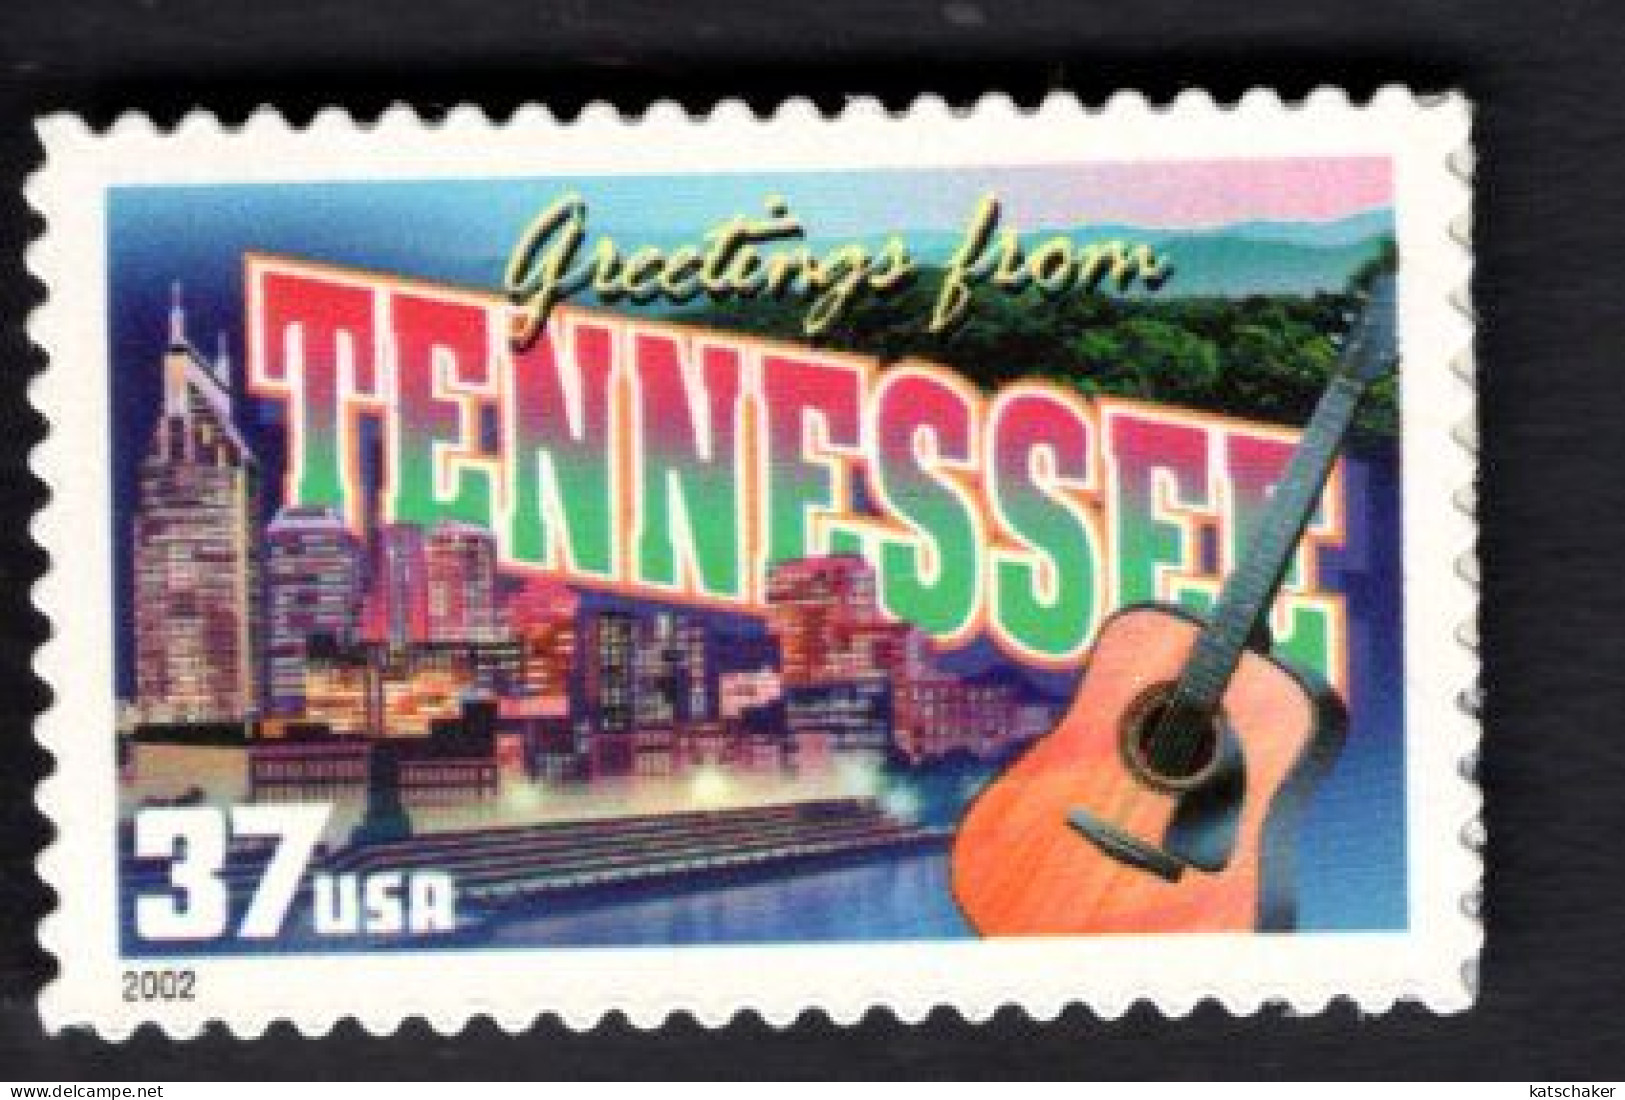 2017248020 2002  SCOTT 3737 (XX) POSTFRIS MINT NEVER HINGED - GREETINGS FROM AMERICA - TENNESSEE - Unused Stamps